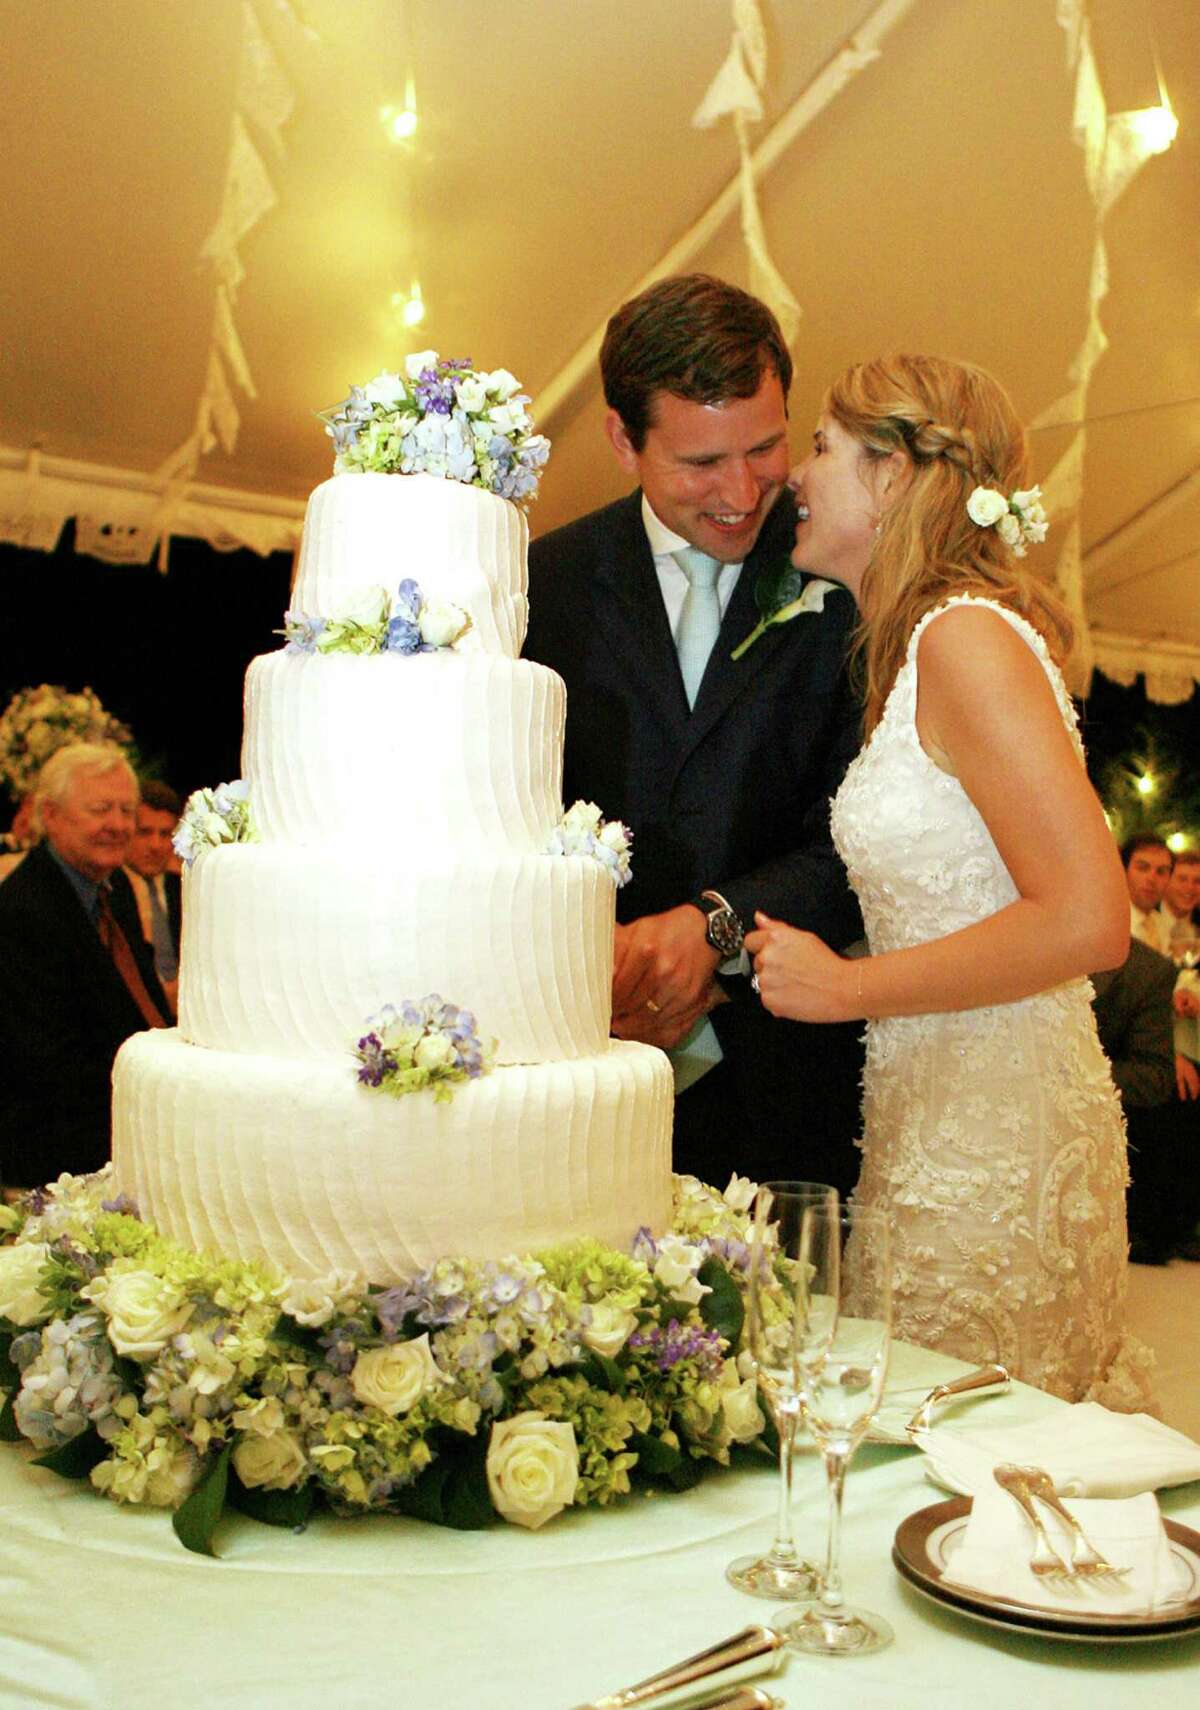 FILE - DECEMBER 11: According to reports, Jenna Bush Hager, daughter of former U.S. President George W. Bush, is pregnant with her first child. CRAWFORD, TX - MAY 10: In this handout image provided by the White House, Henry and Jenna Hager pause as they cut their wedding cake during a reception in their honor following the ceremony at Prairie Chapel Ranch May 10, 2008 near Crawford, Texas.